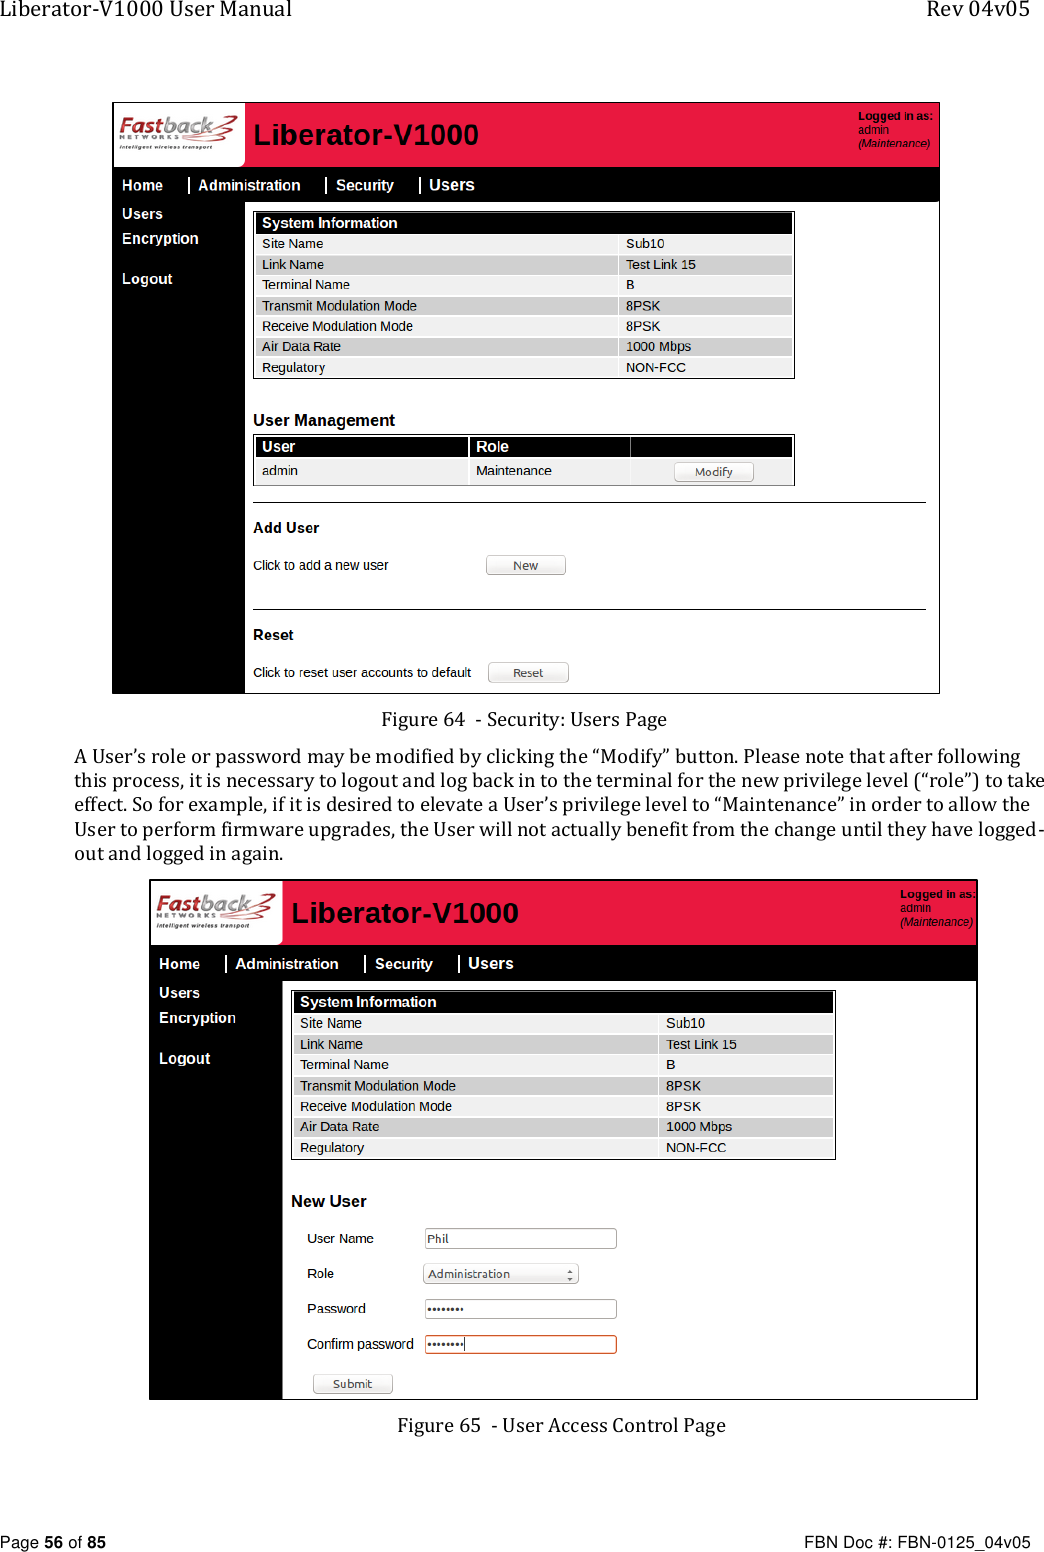 Liberator-V1000 User Manual  Rev 04v05     Page 56 of 85   FBN Doc #: FBN-0125_04v05  Figure 64  - Security: Users Page A User’s role or password may be modified by clicking the “Modify” button. Please note that after following this process, it is necessary to logout and log back in to the terminal for the new privilege level (“role”) to take effect. So for example, if it is desired to elevate a User’s privilege level to “Maintenance” in order to allow the User to perform firmware upgrades, the User will not actually benefit from the change until they have logged-out and logged in again.  Figure 65  - User Access Control Page 